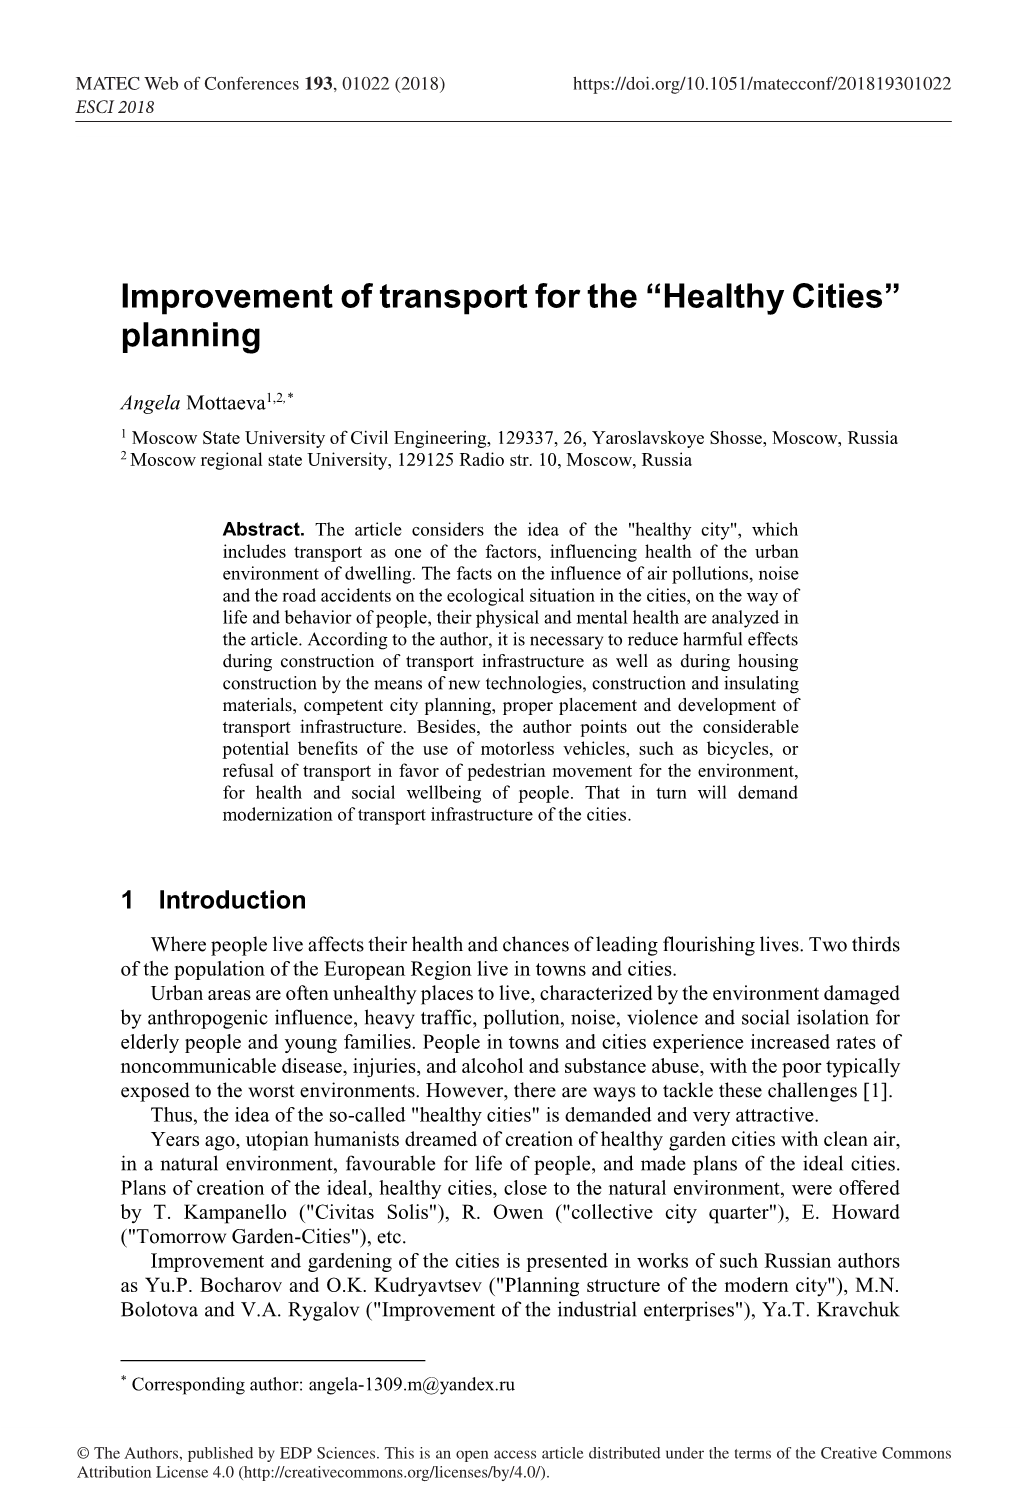 Healthy Cities” Planning